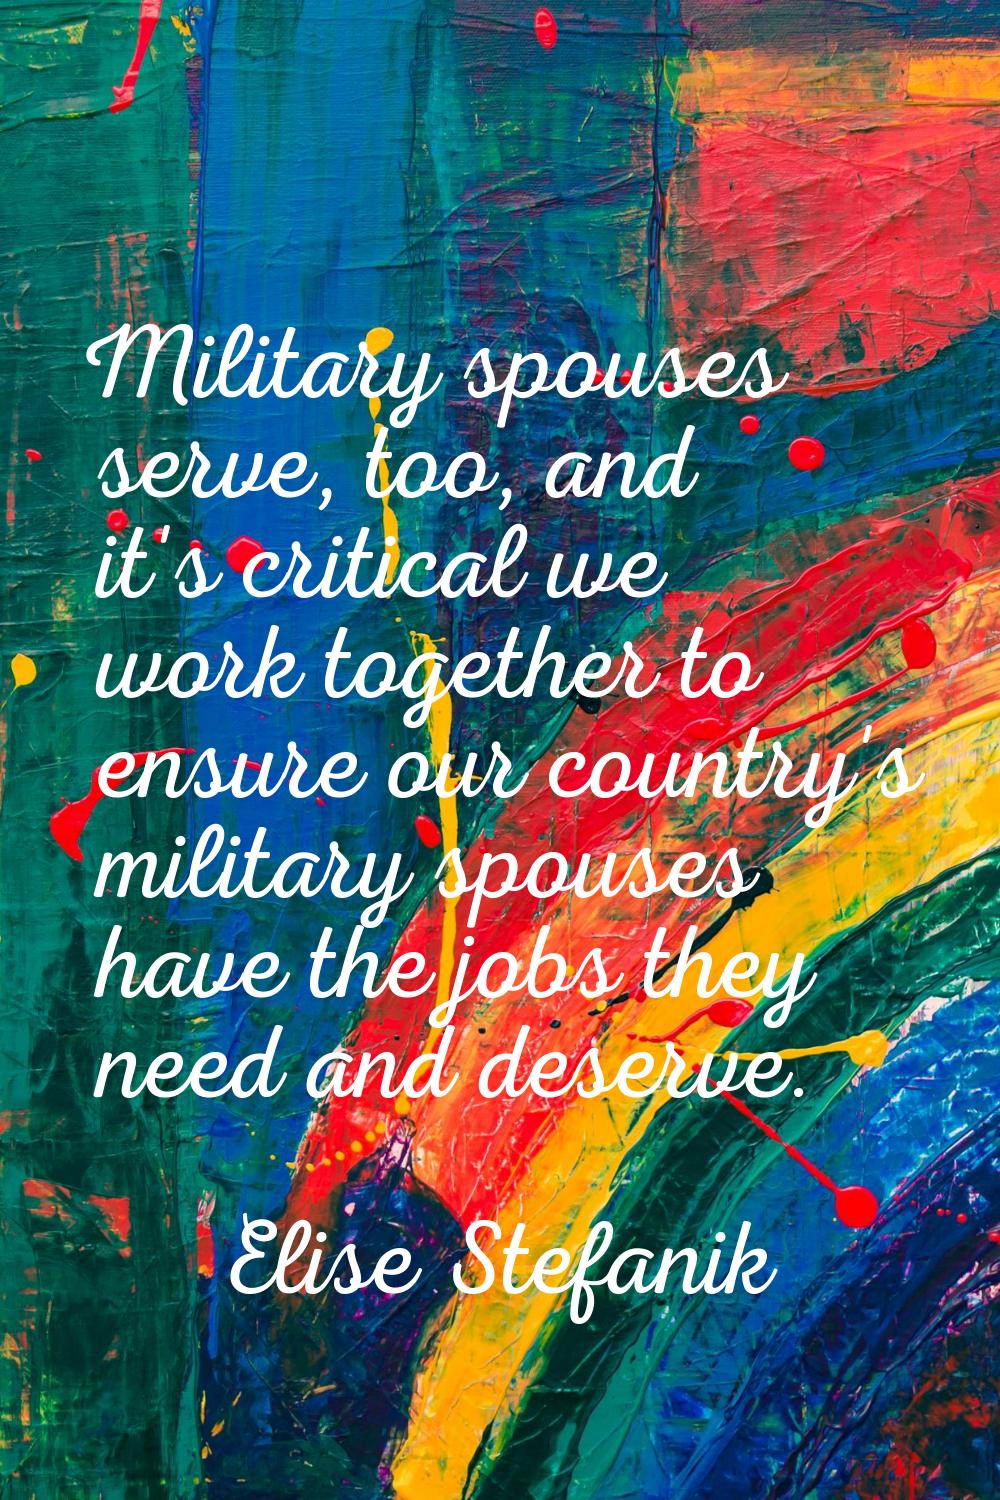 Military spouses serve, too, and it's critical we work together to ensure our country's military sp